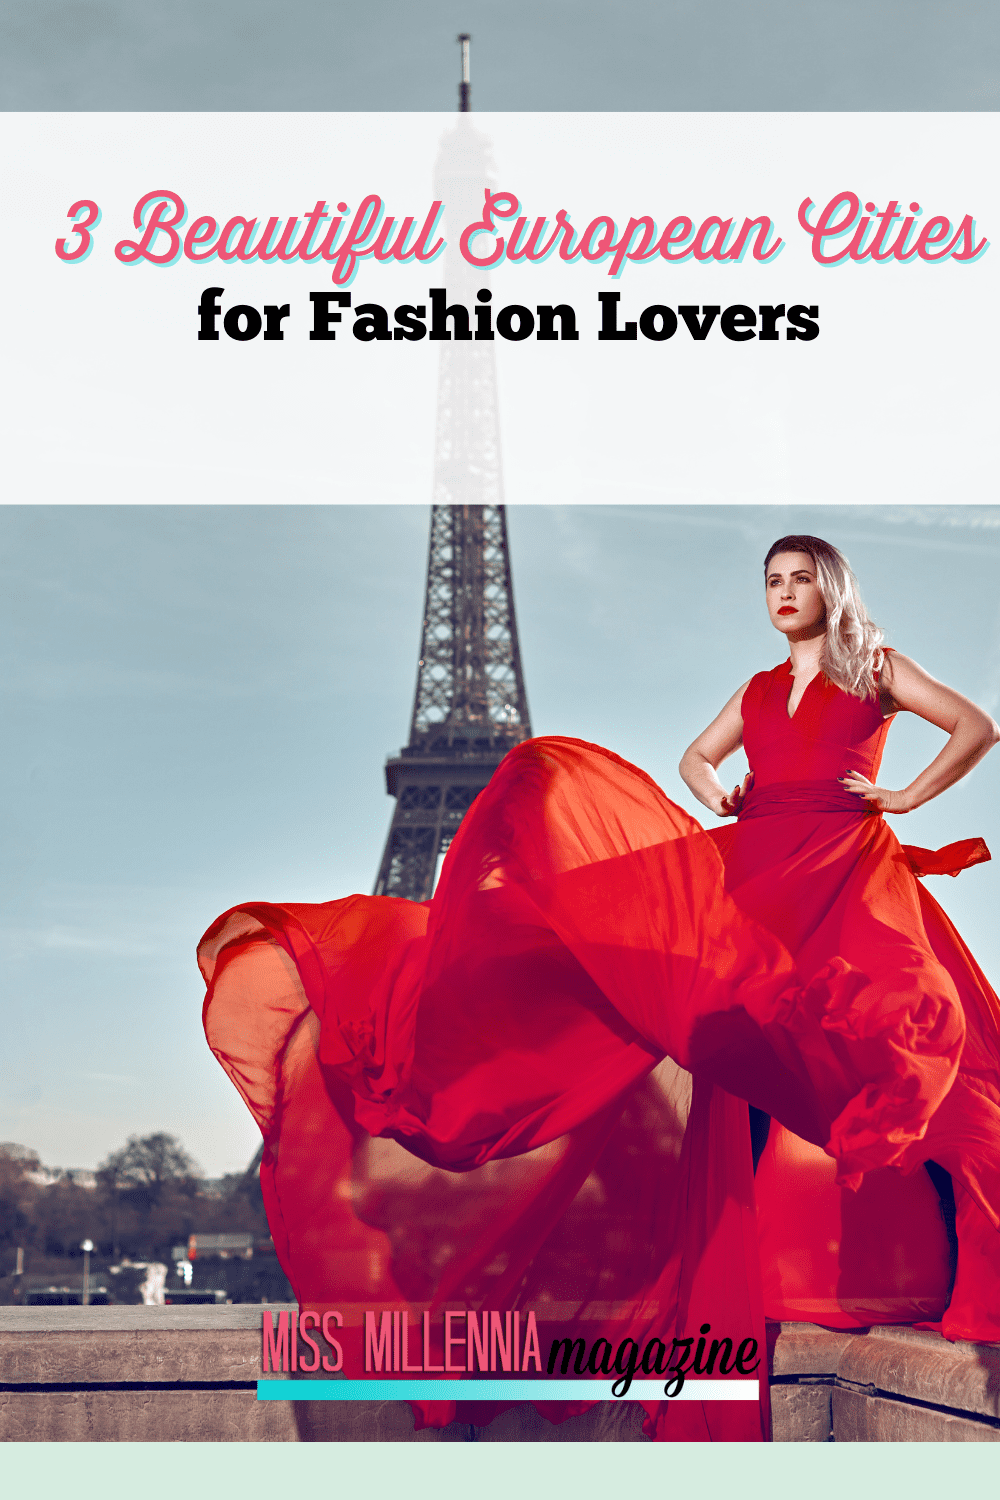 3 Beautiful European Cities for Fashion Lovers